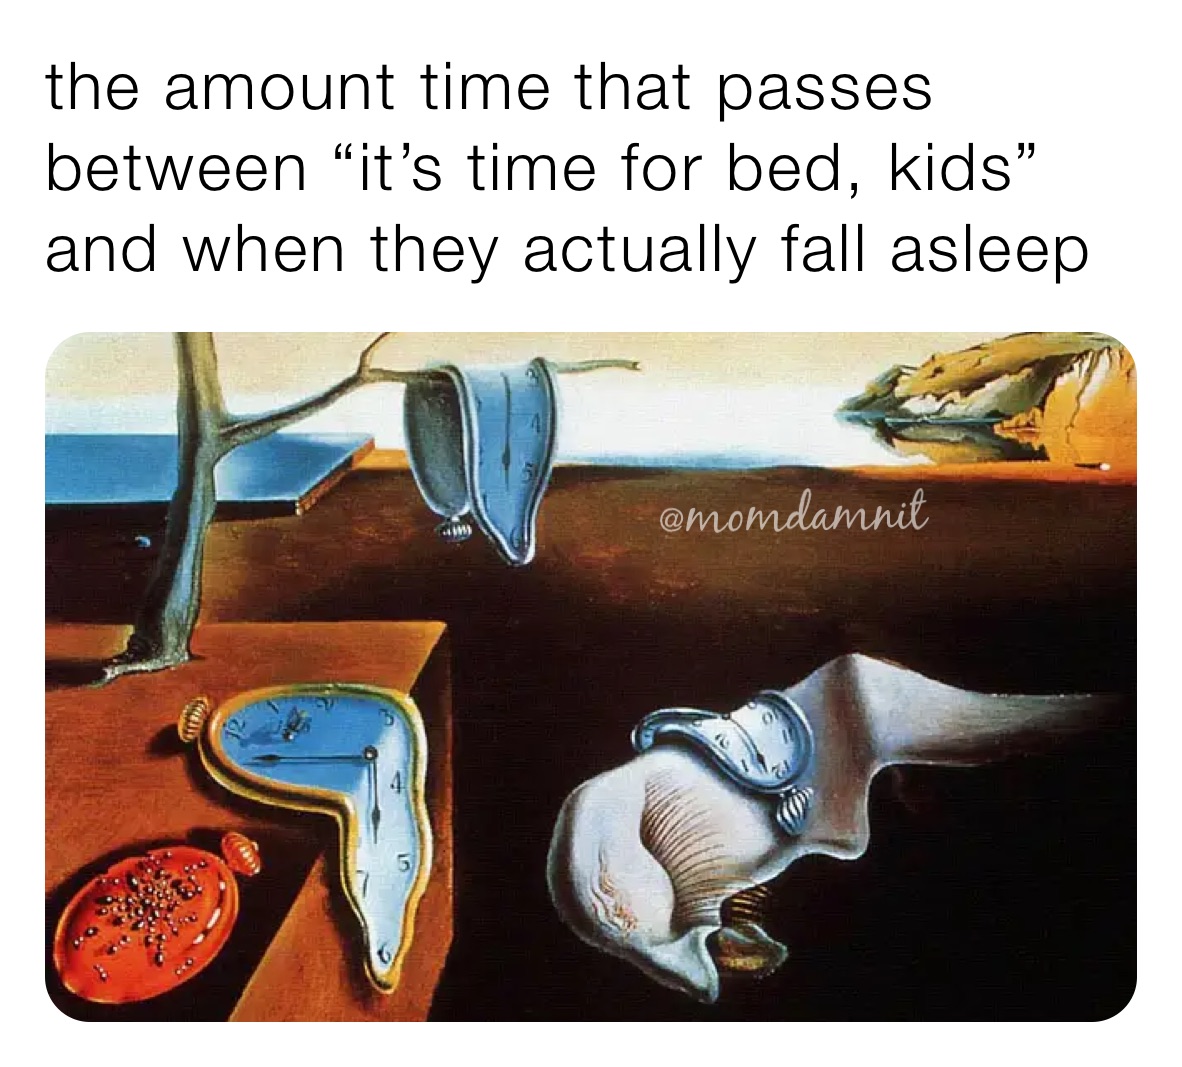 the amount time that passes between “it’s time for bed, kids” and when they actually fall asleep 